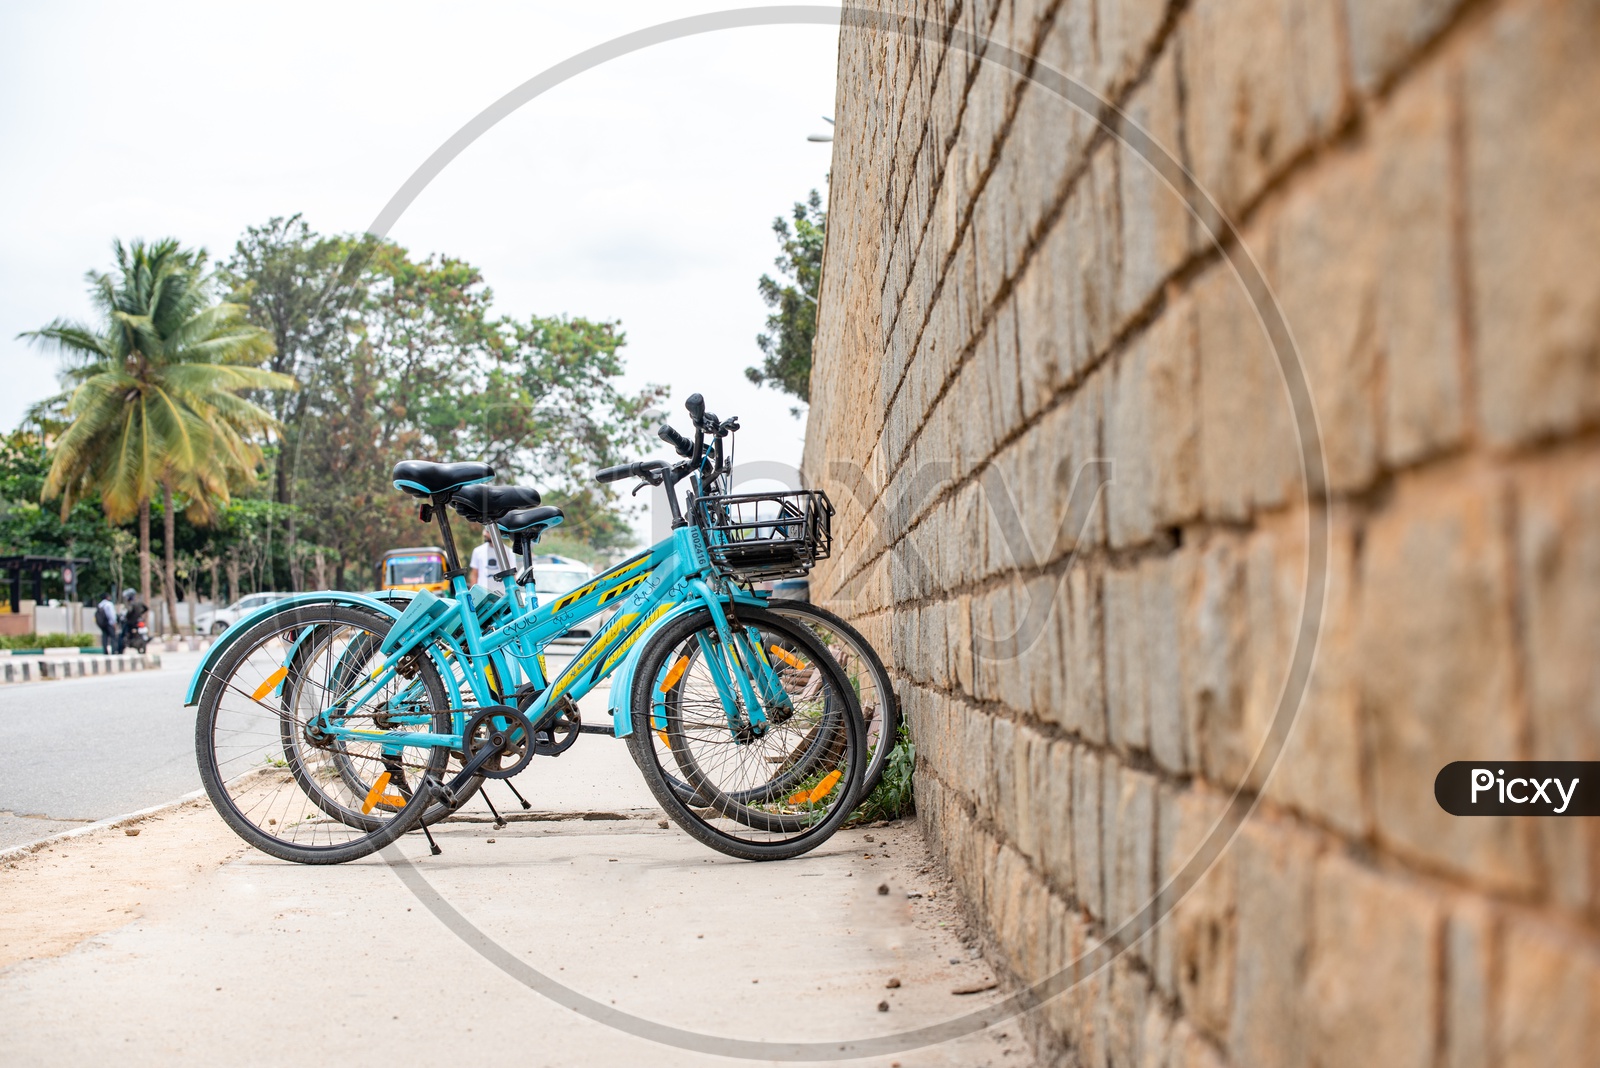 YULU  an Electric Cycle  An app Based Bicycle Rentals at a Hub